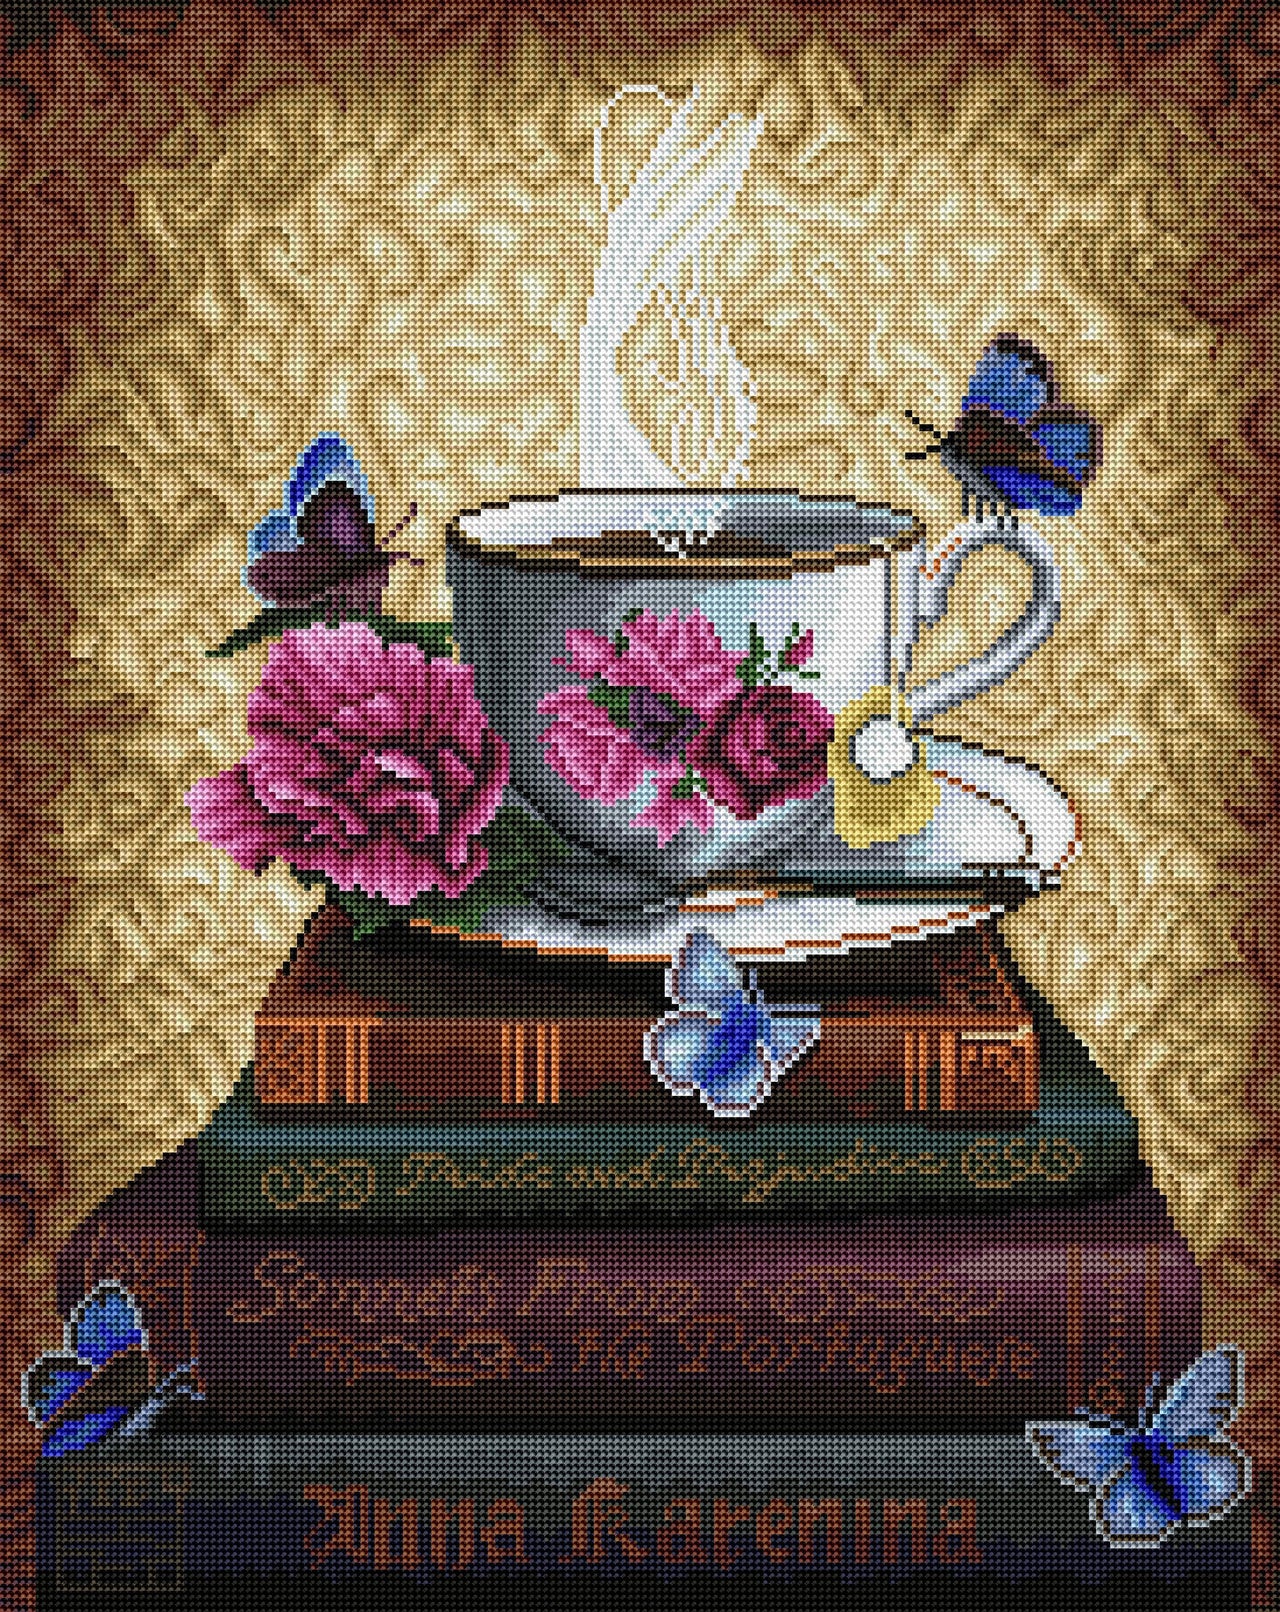 Diamond Painting Tea & Books 20" x 25" (51cm x 64cm) / Round With 57 Colors Including 3 ABs / 41,268